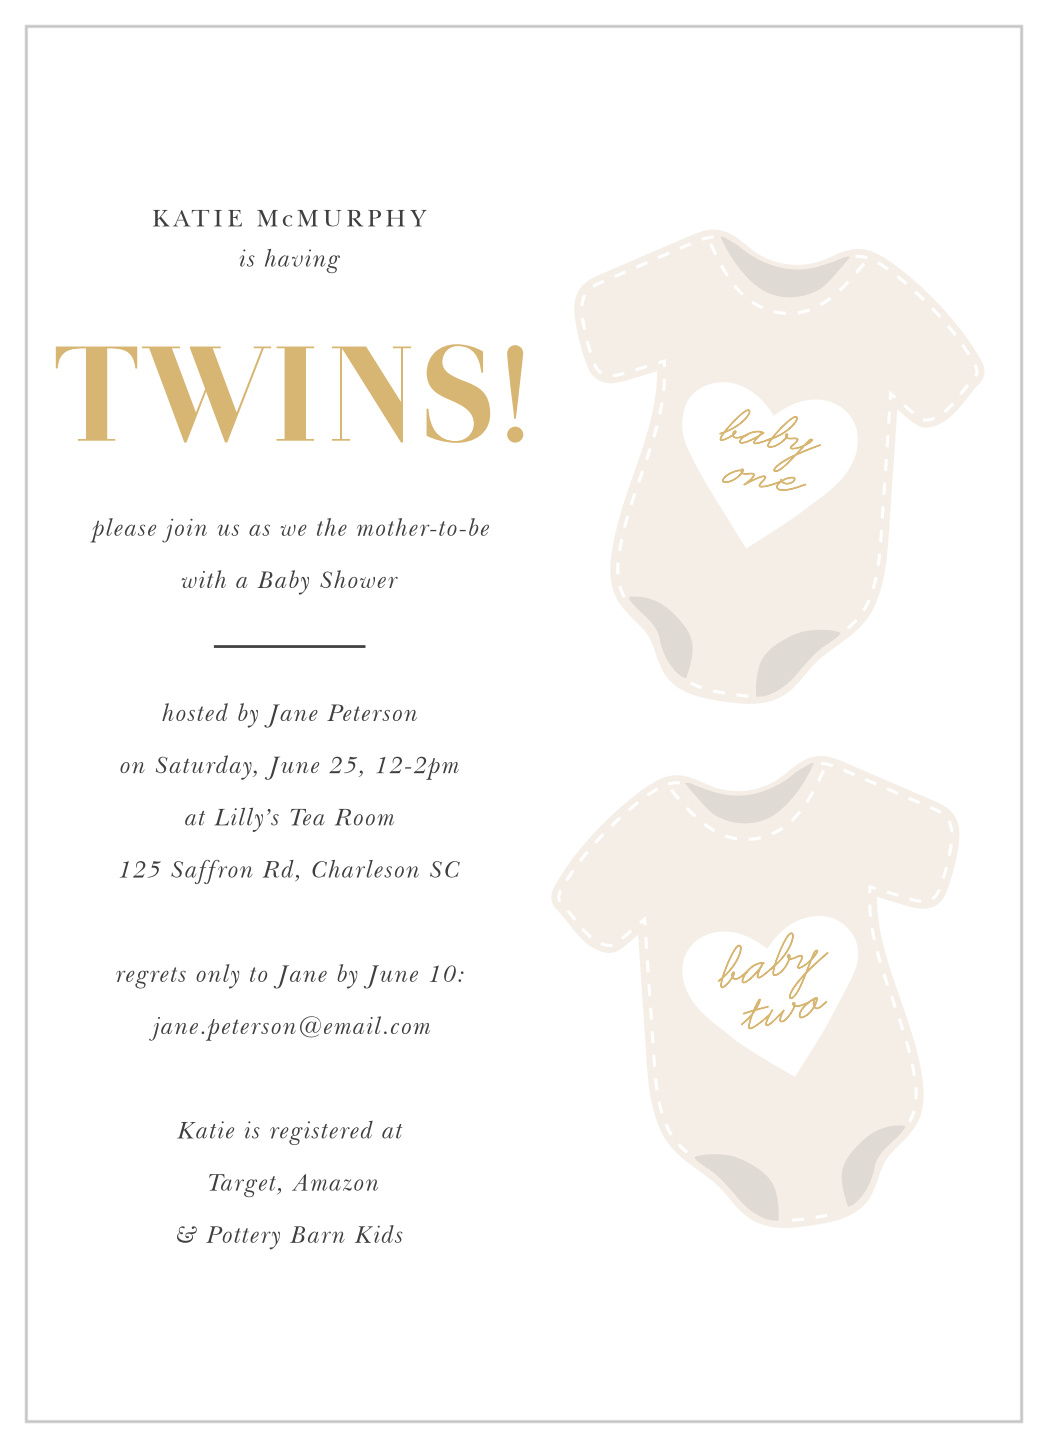 Twinsies Time Baby Shower Invitations